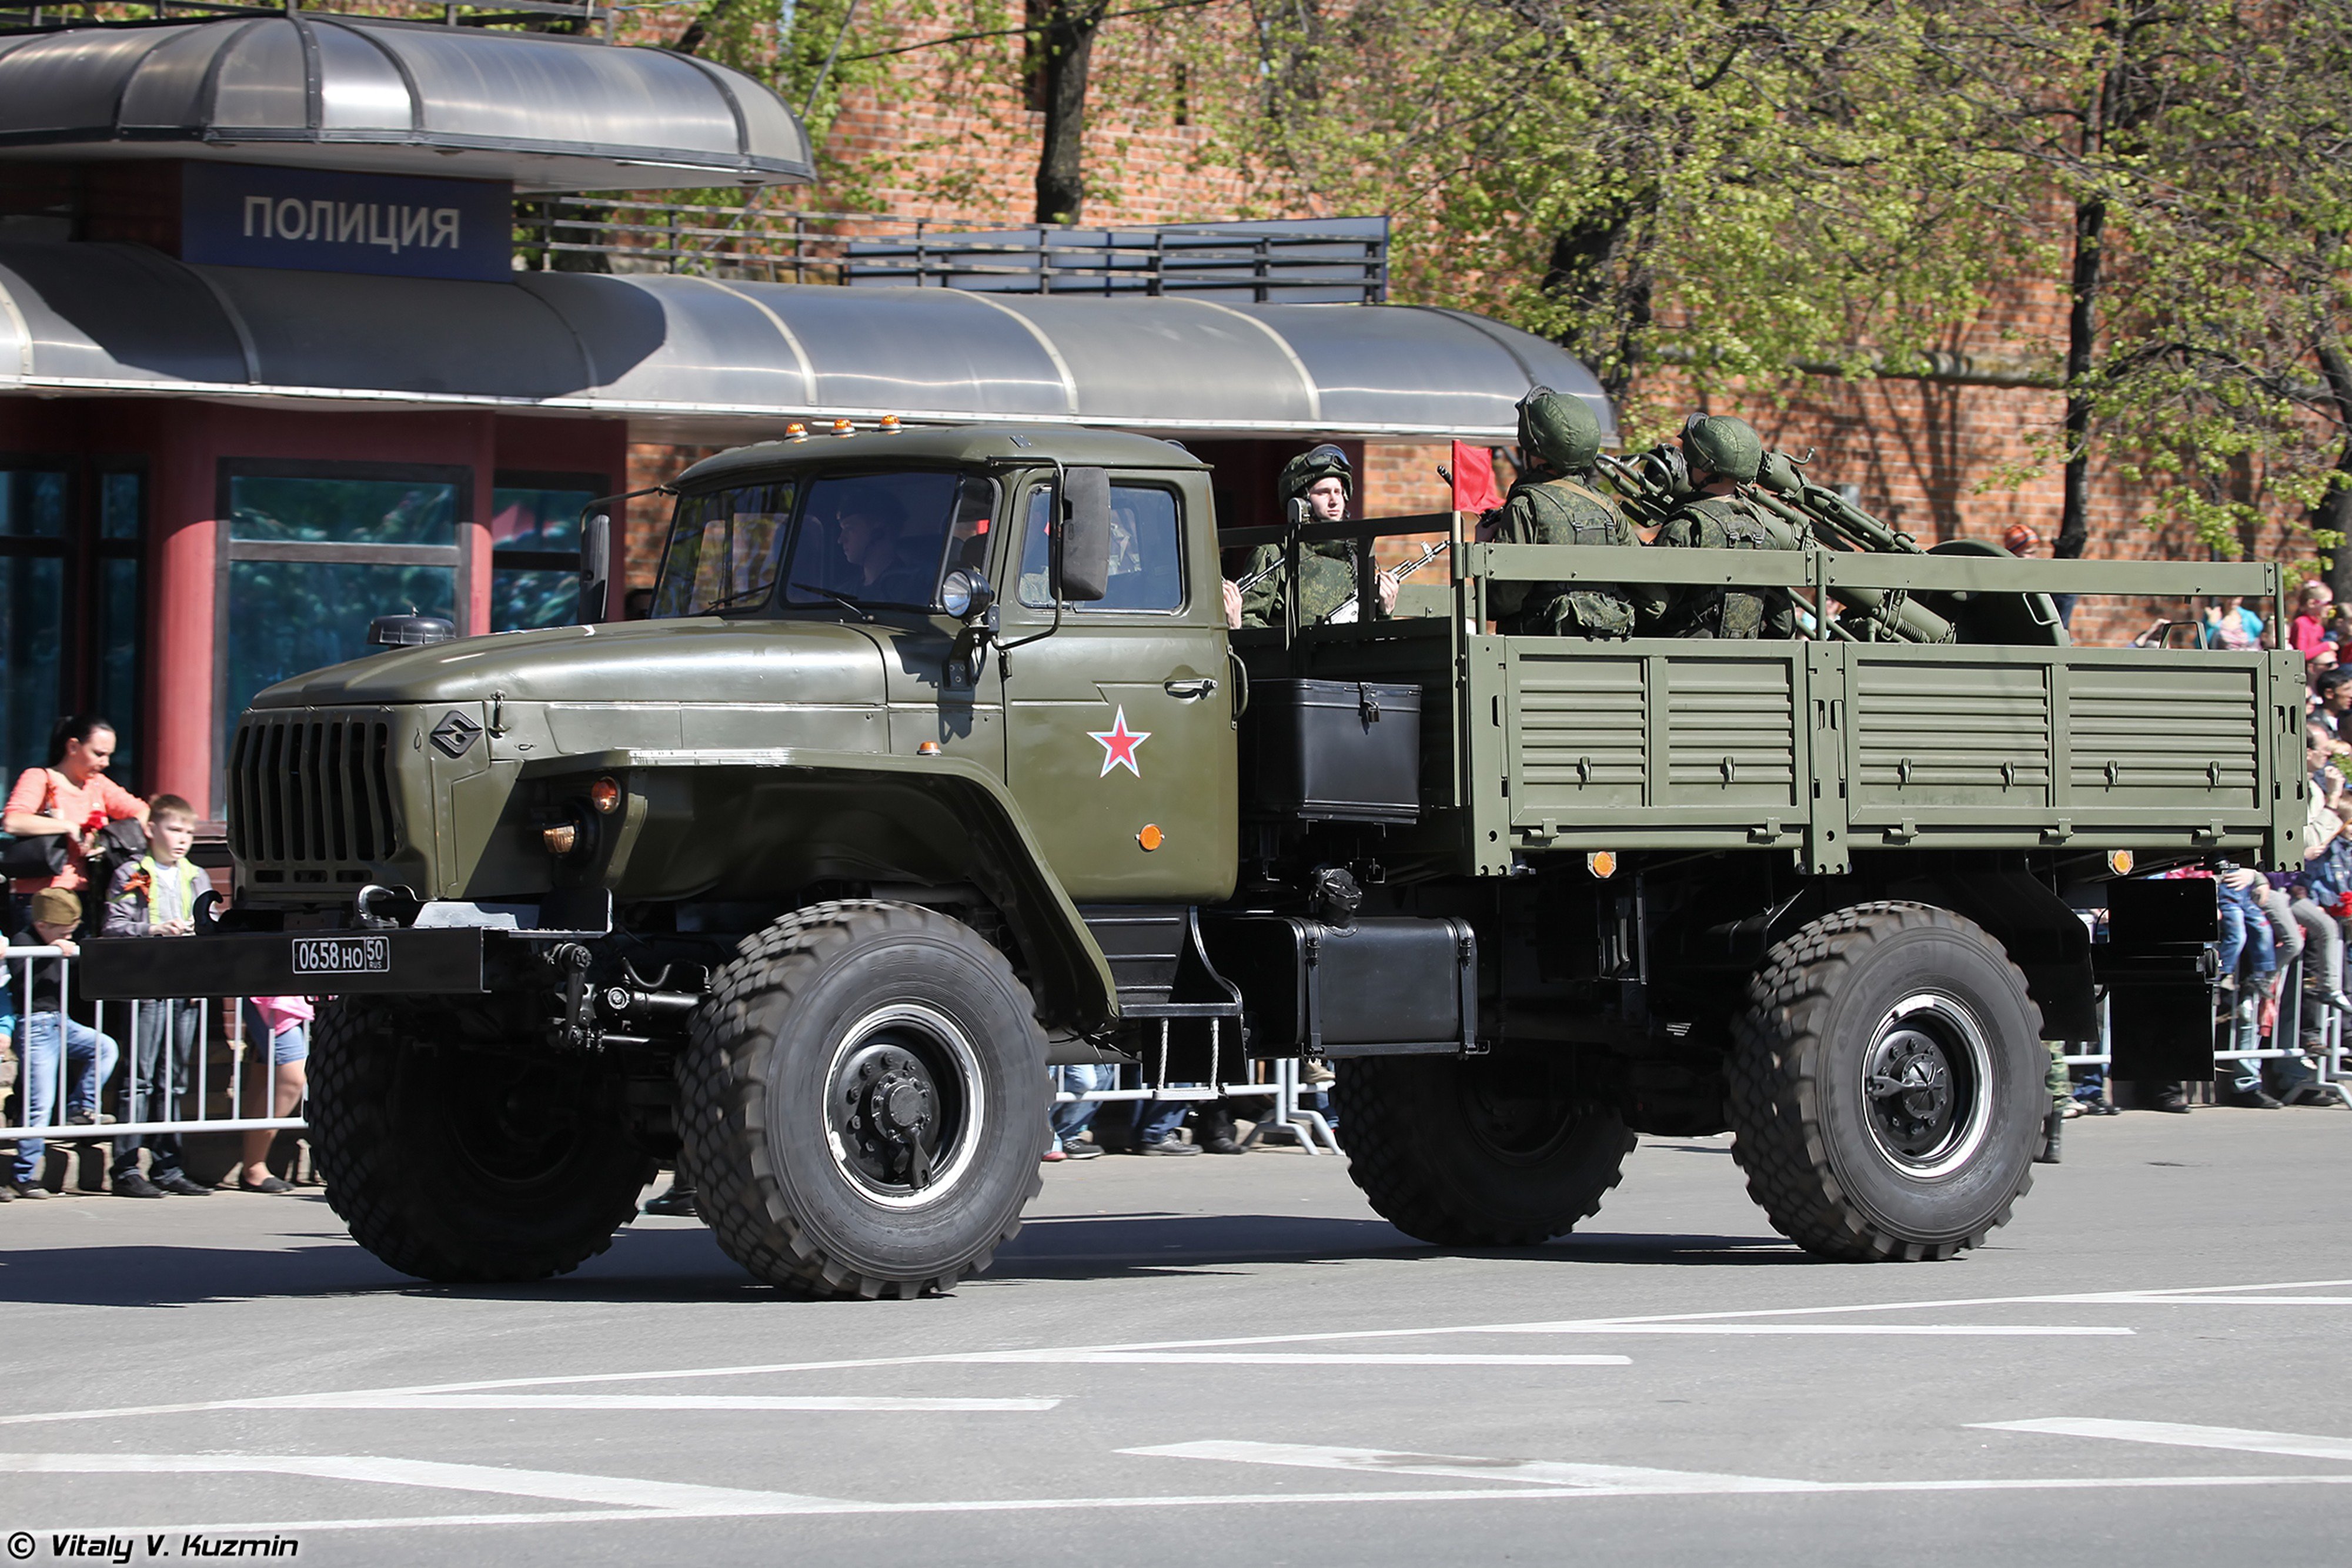 2014, Victory, Day, Parade in nizhny novgorod, Russia, Military, Russian, Army, Red star, Truck, Ural 43206, With, 120mm, 2b11, Mortar, 2, 4000x2667 Wallpaper